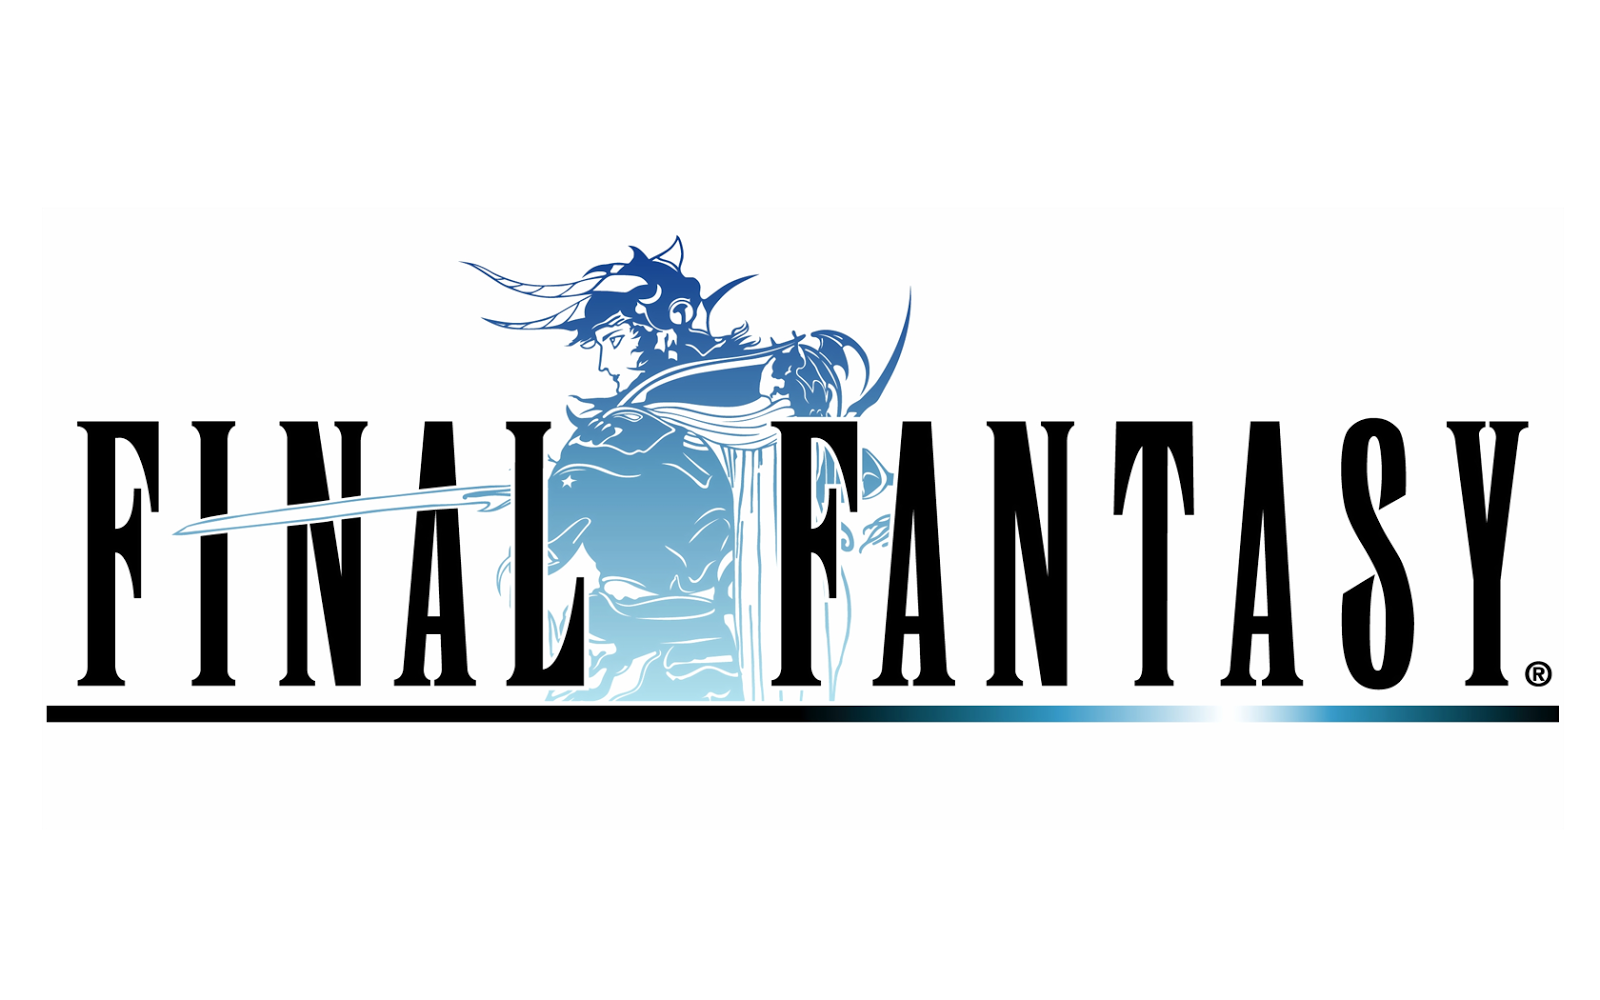 How To Enable Vsync Fix Final Fantasy Screen Tearing Problem On